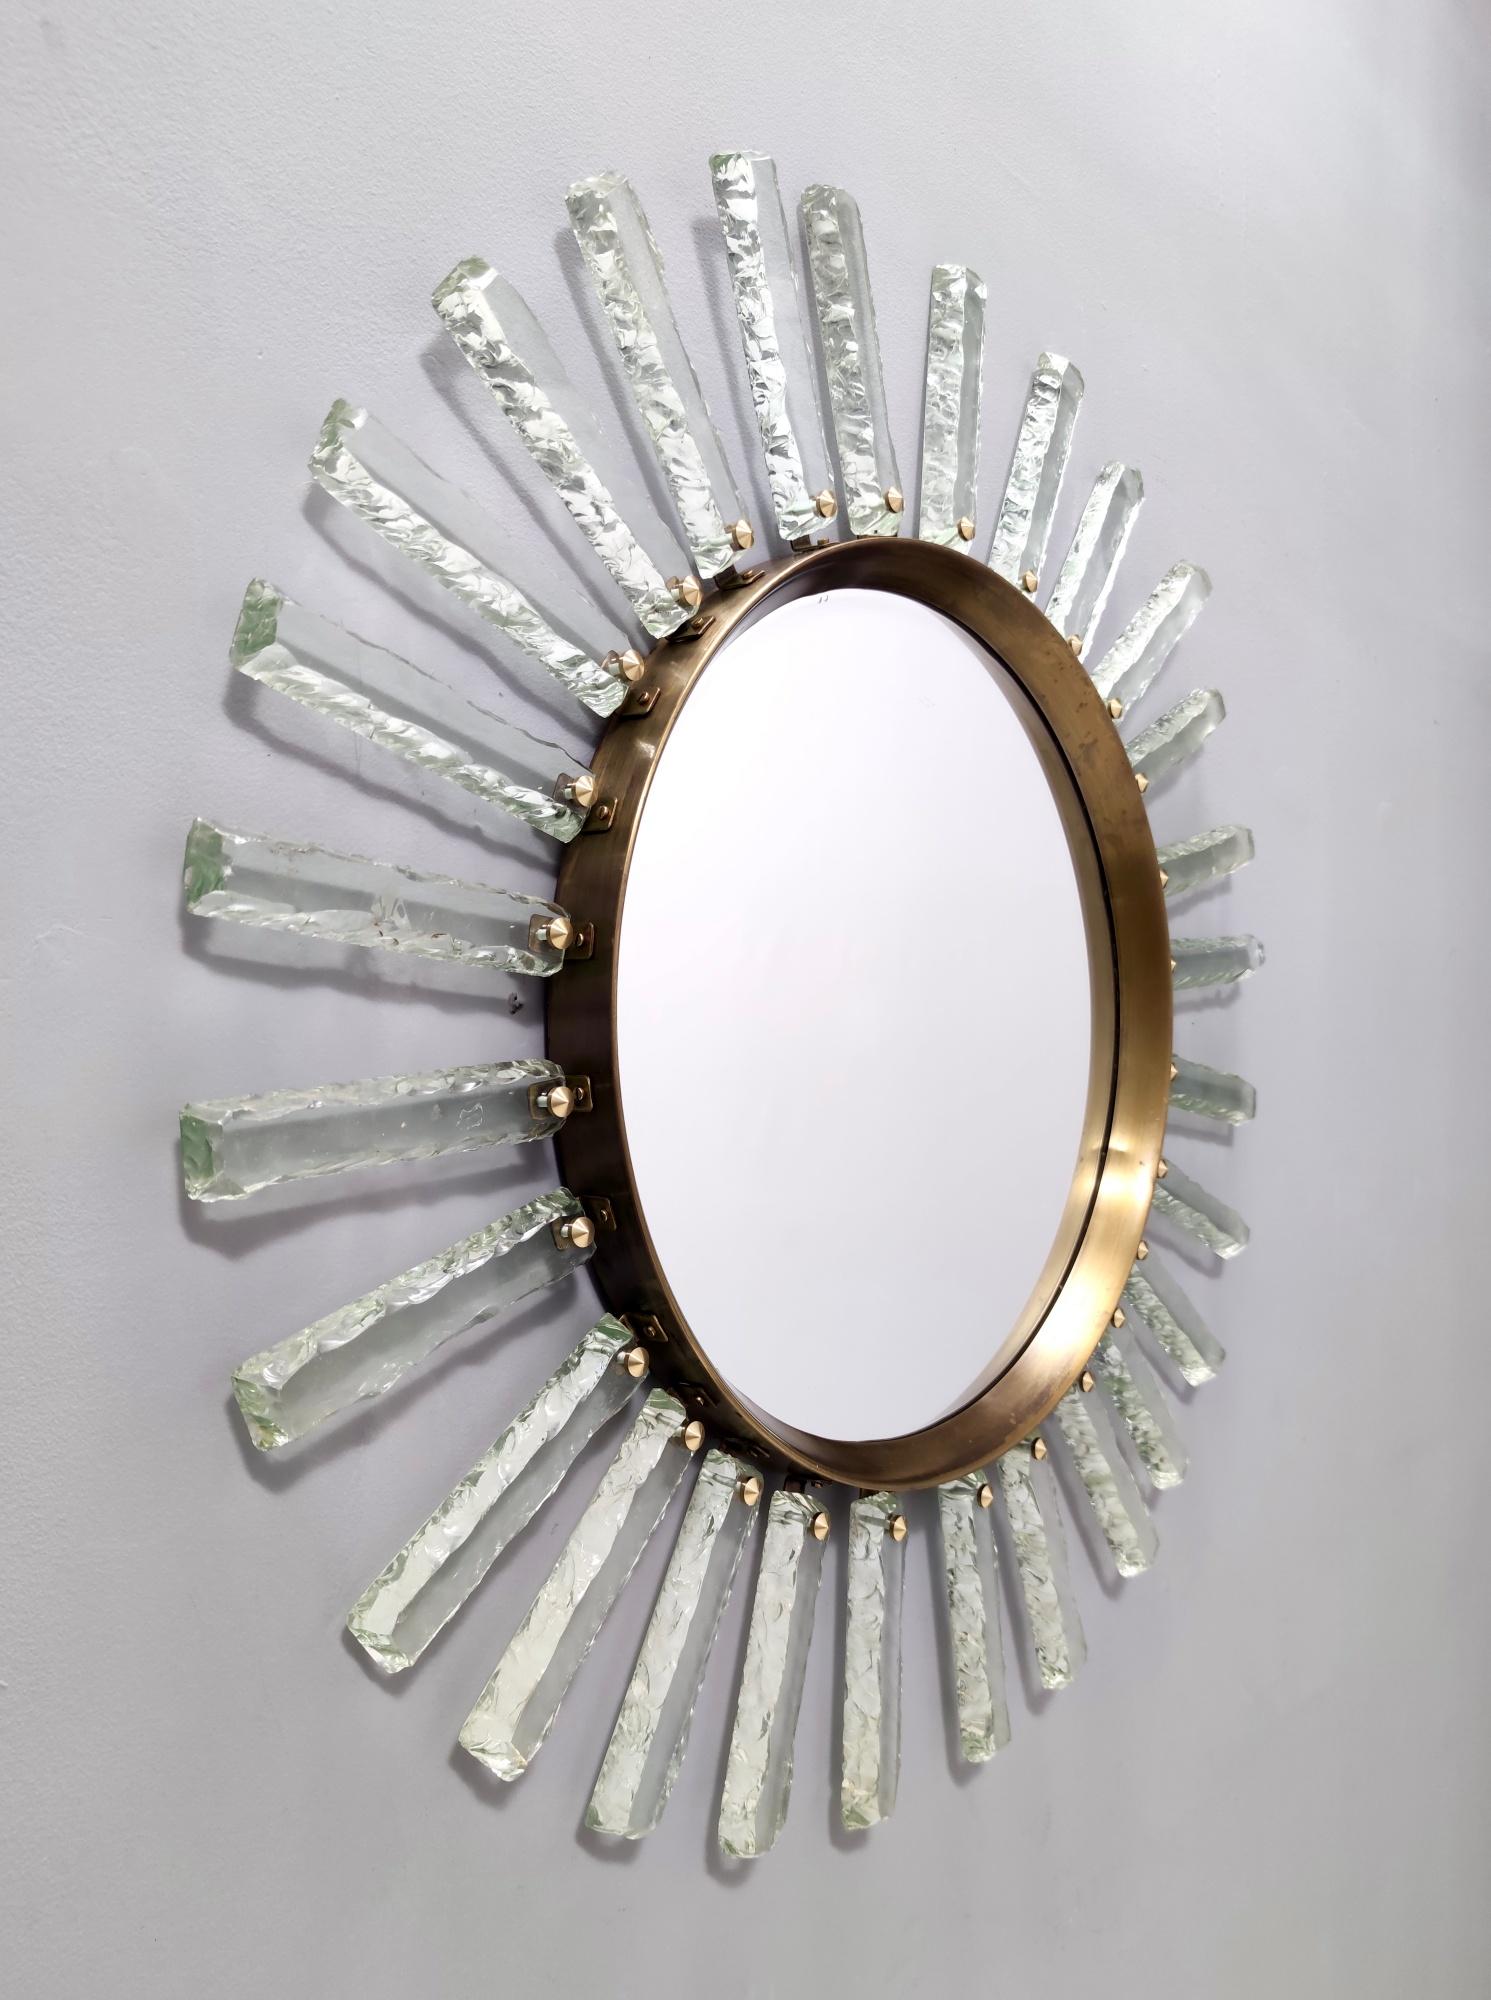 Contemporary One-of-a-Kind Sun Shaped Hammered Glass and Brass Wall Mirror by Enzio Wenk For Sale